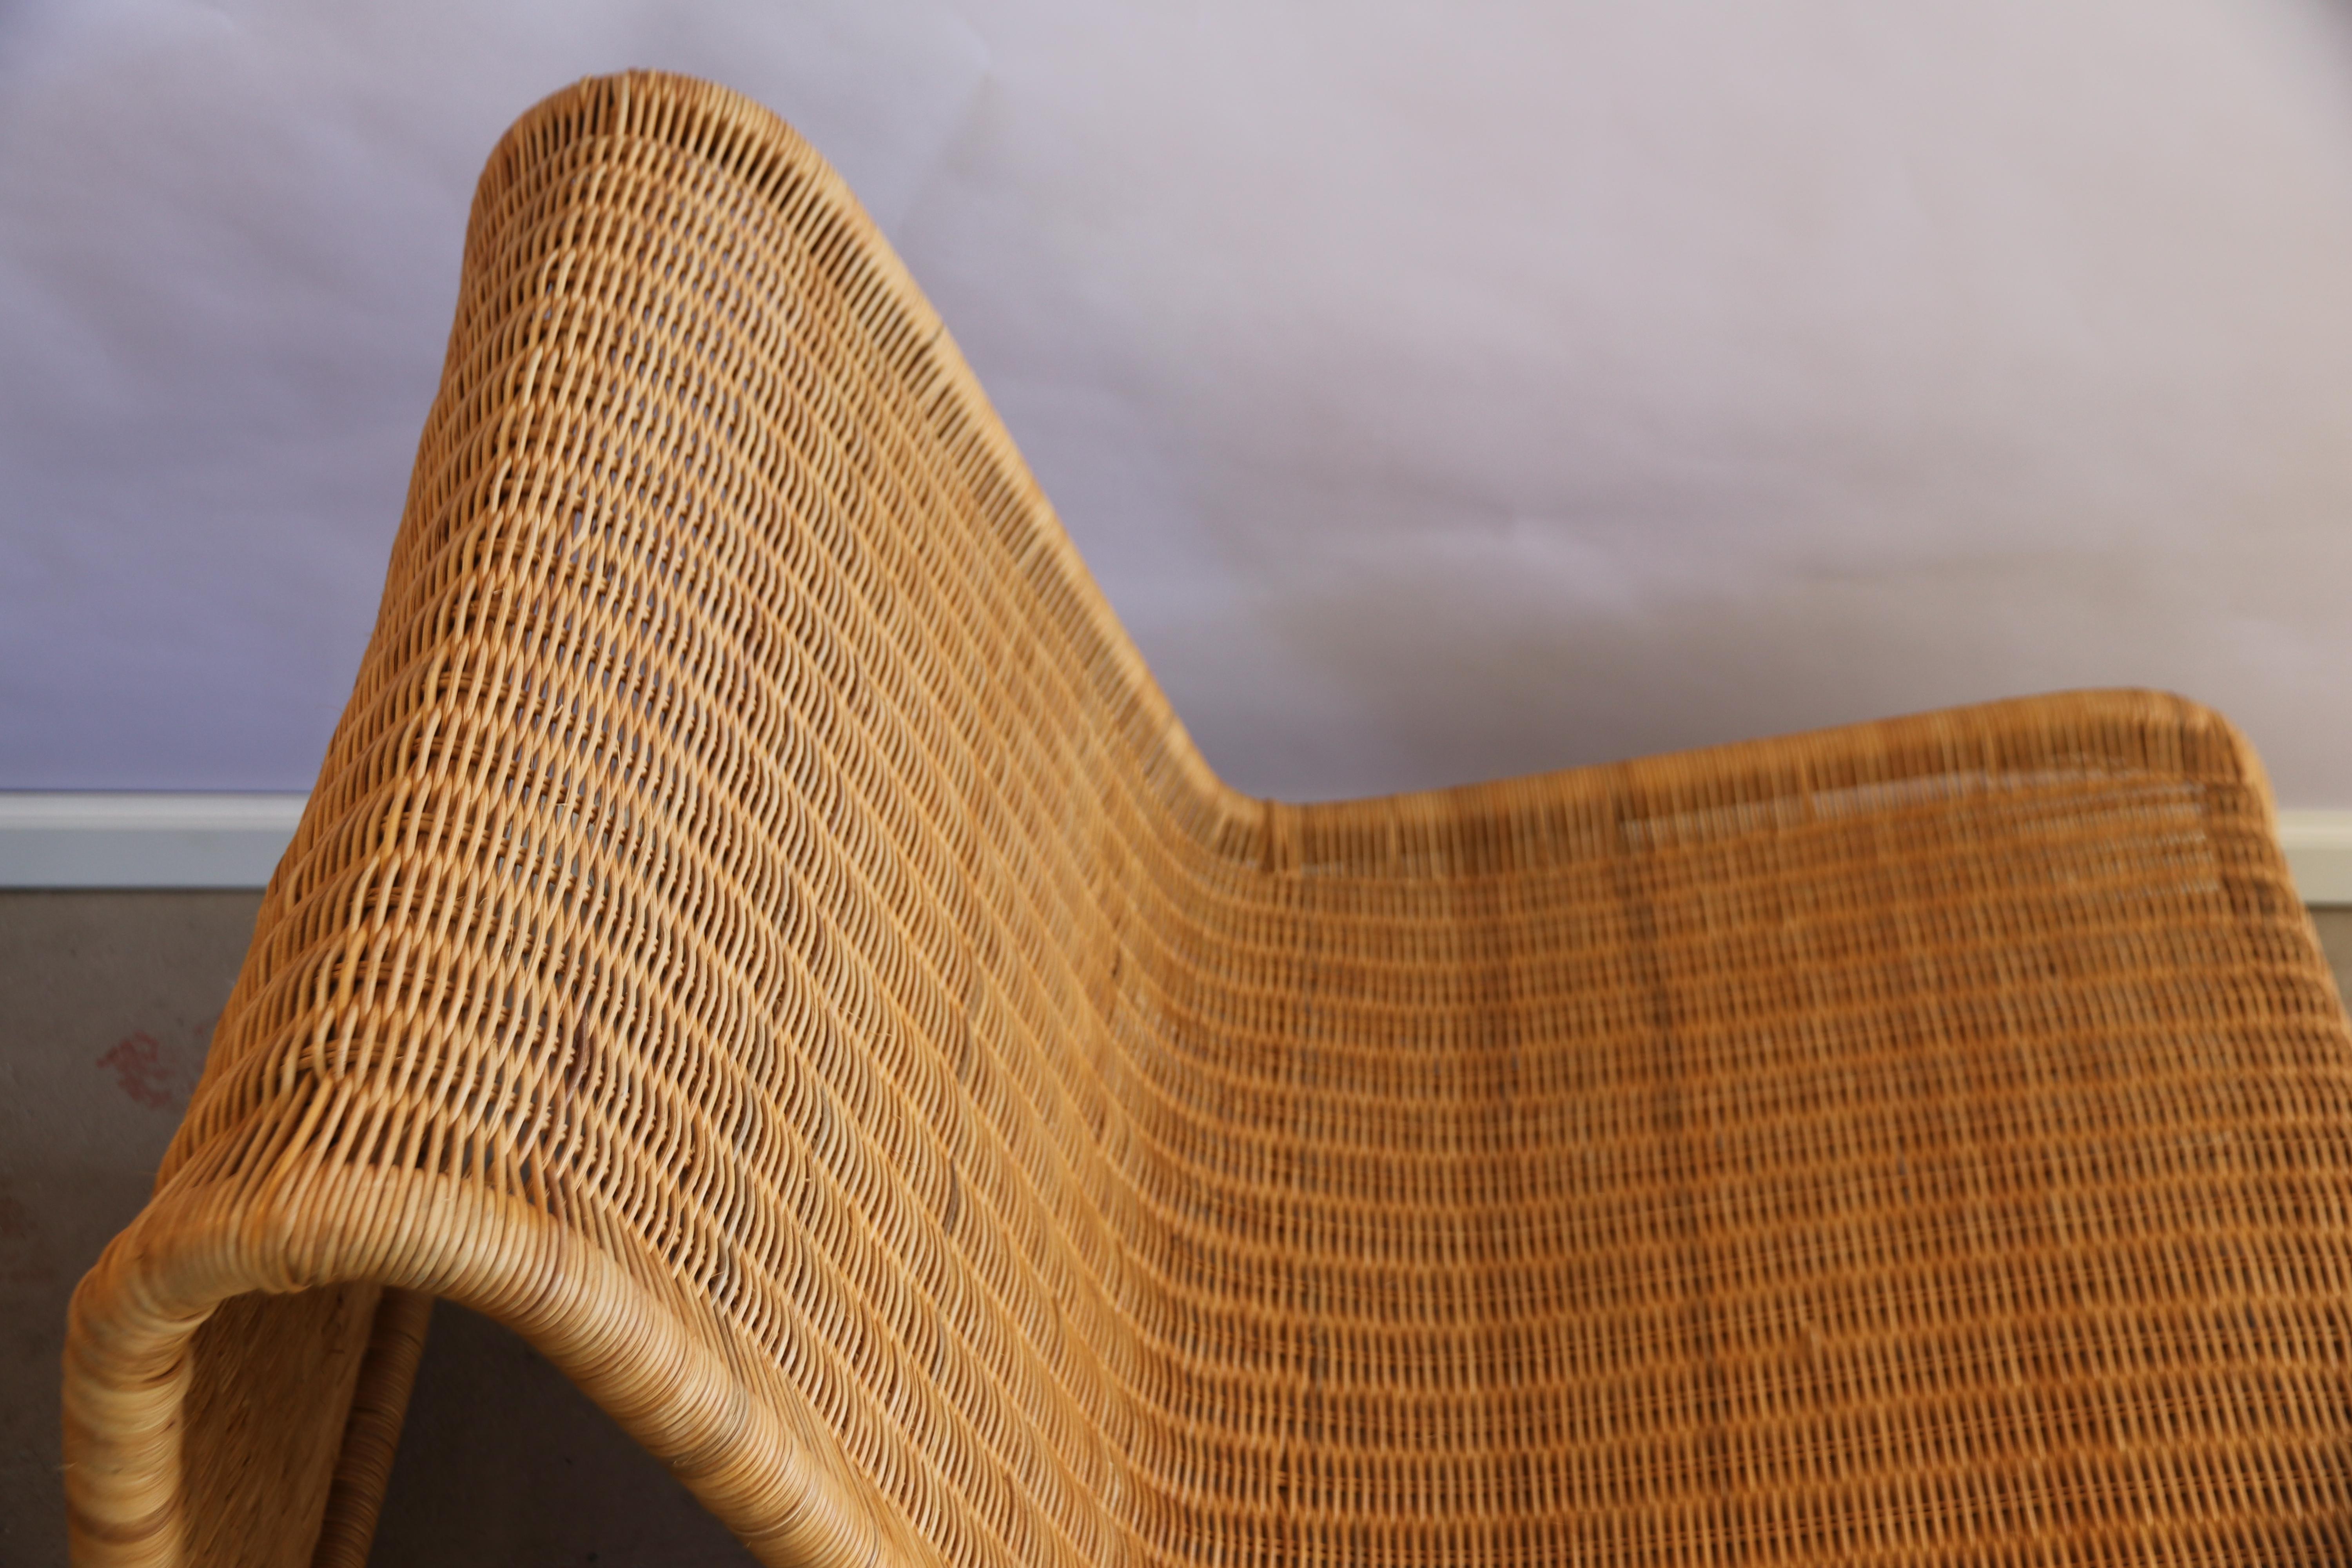 Steel Tito Agnoli P4 Rattan Easy or Lounge Outdoor Chaise Longue Chair, 1960s